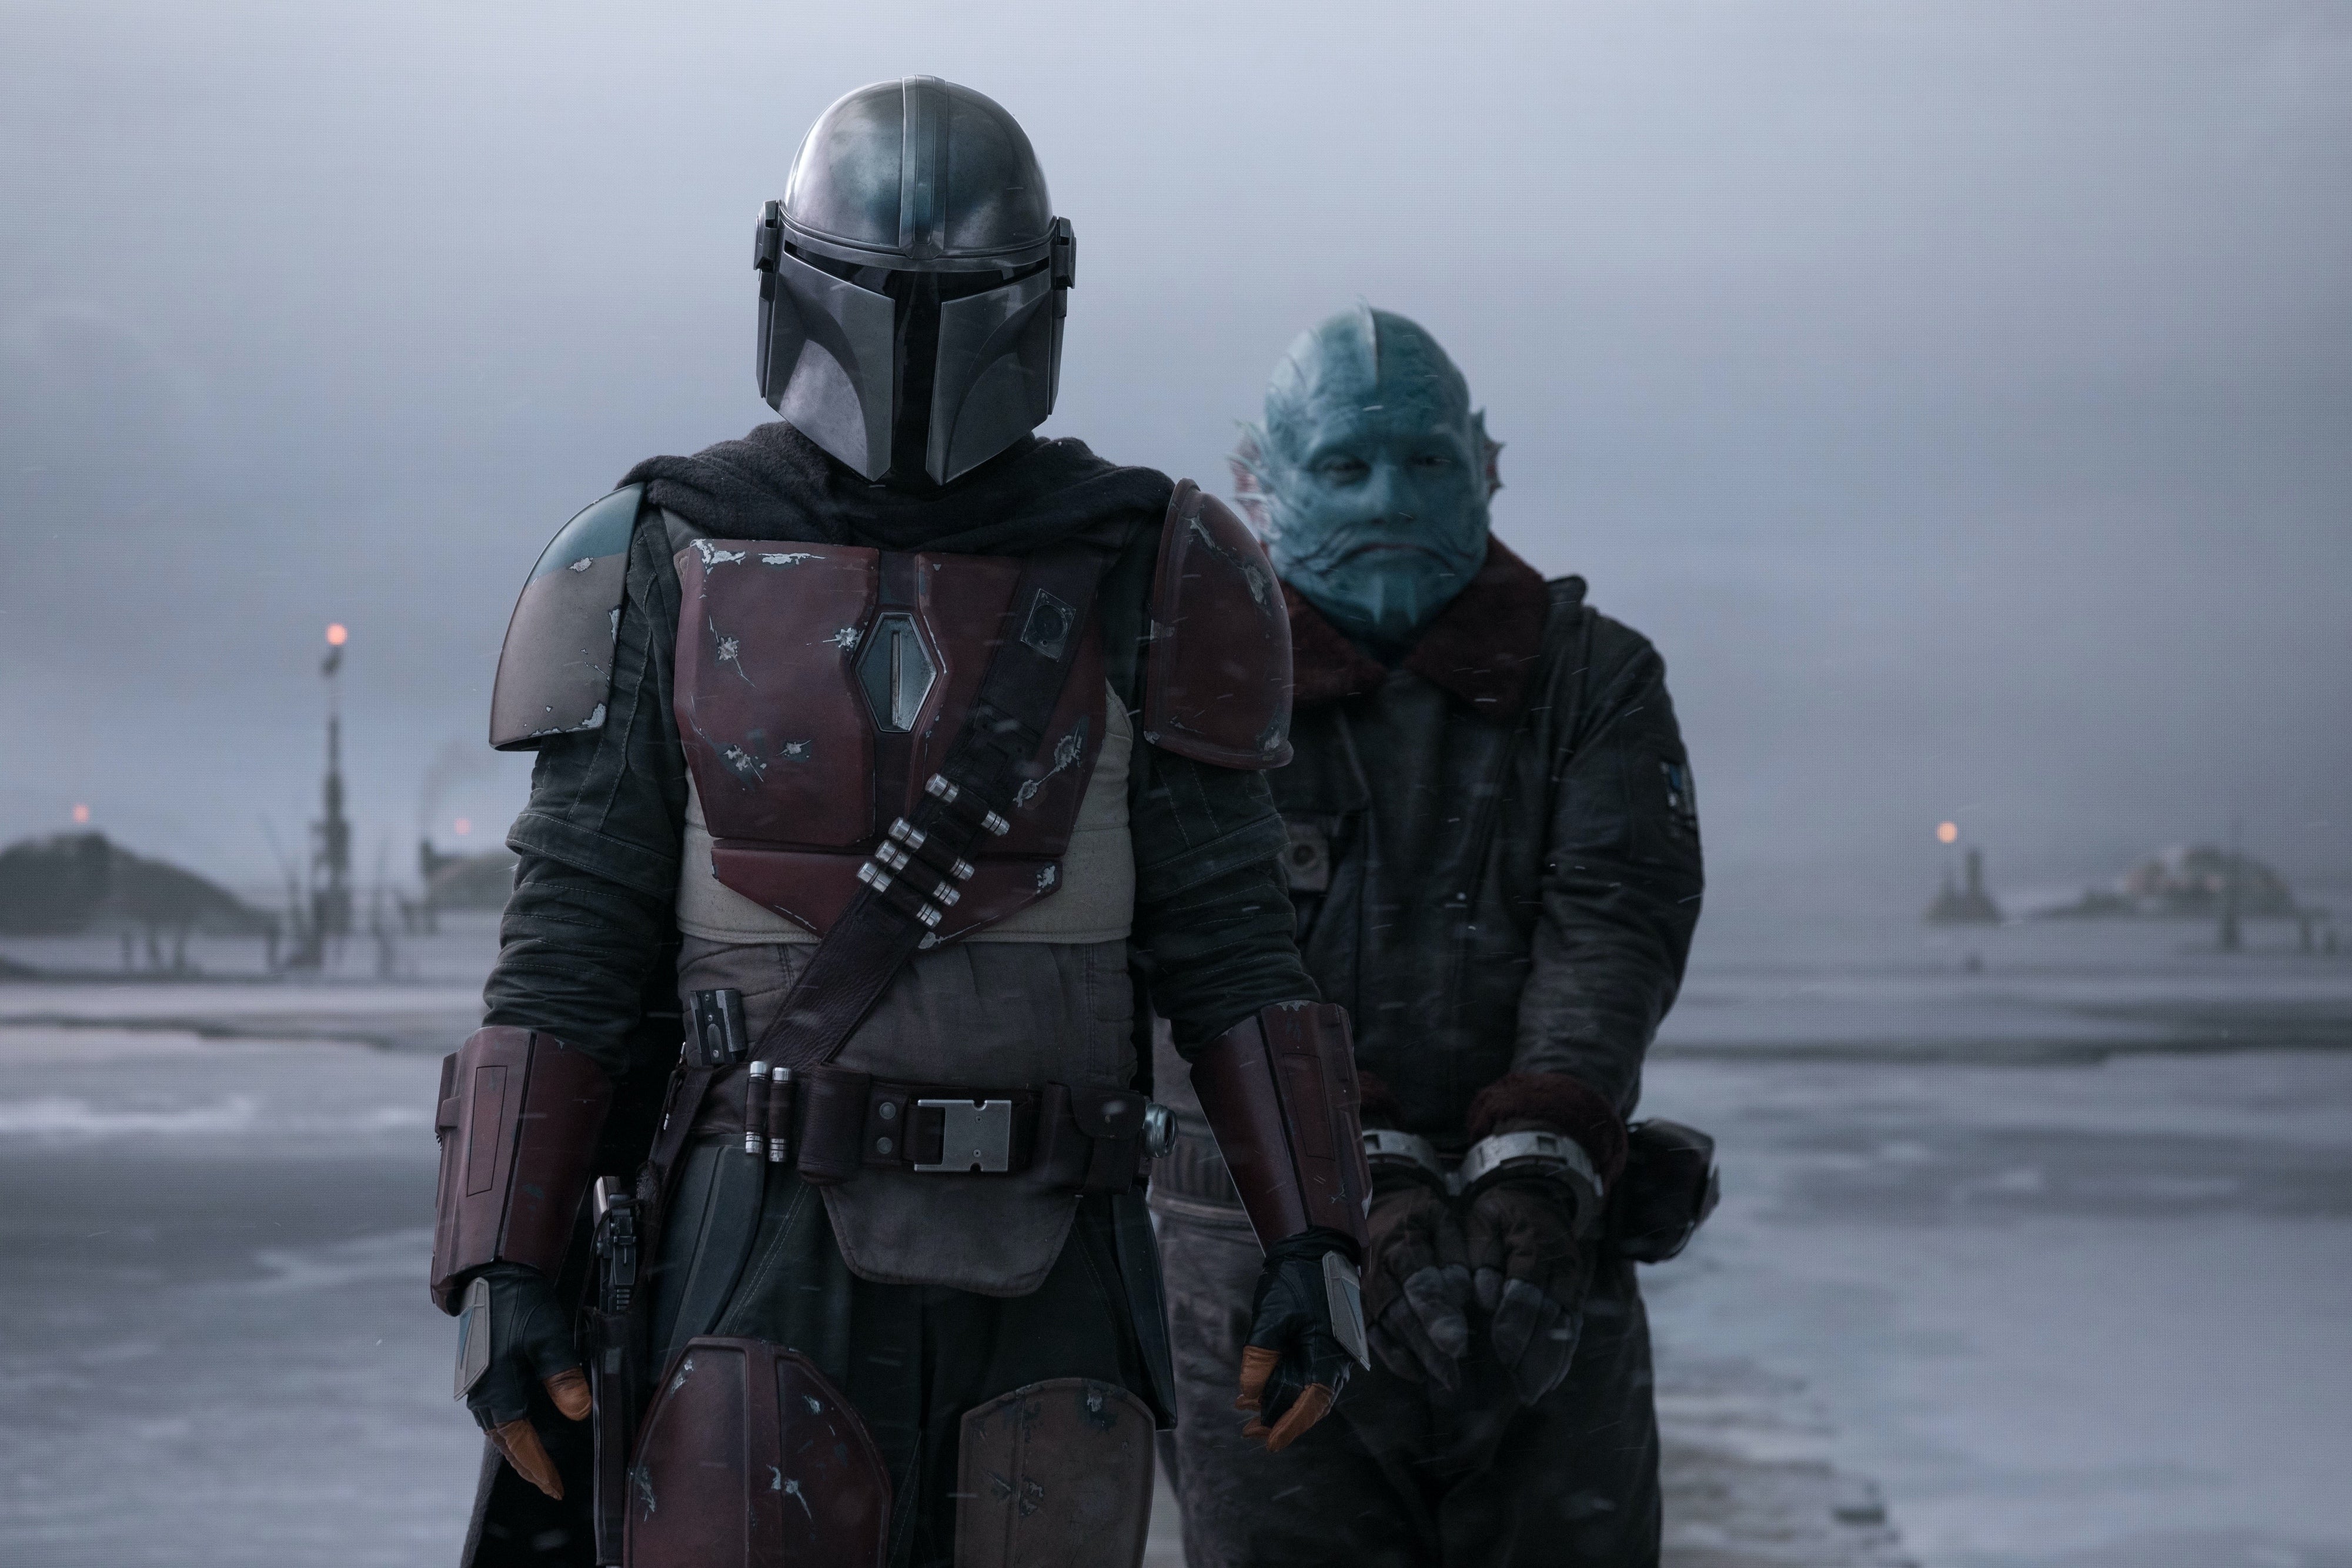 The Daily Crate | Feature: Three Best Moments From 'The Mandalorian'